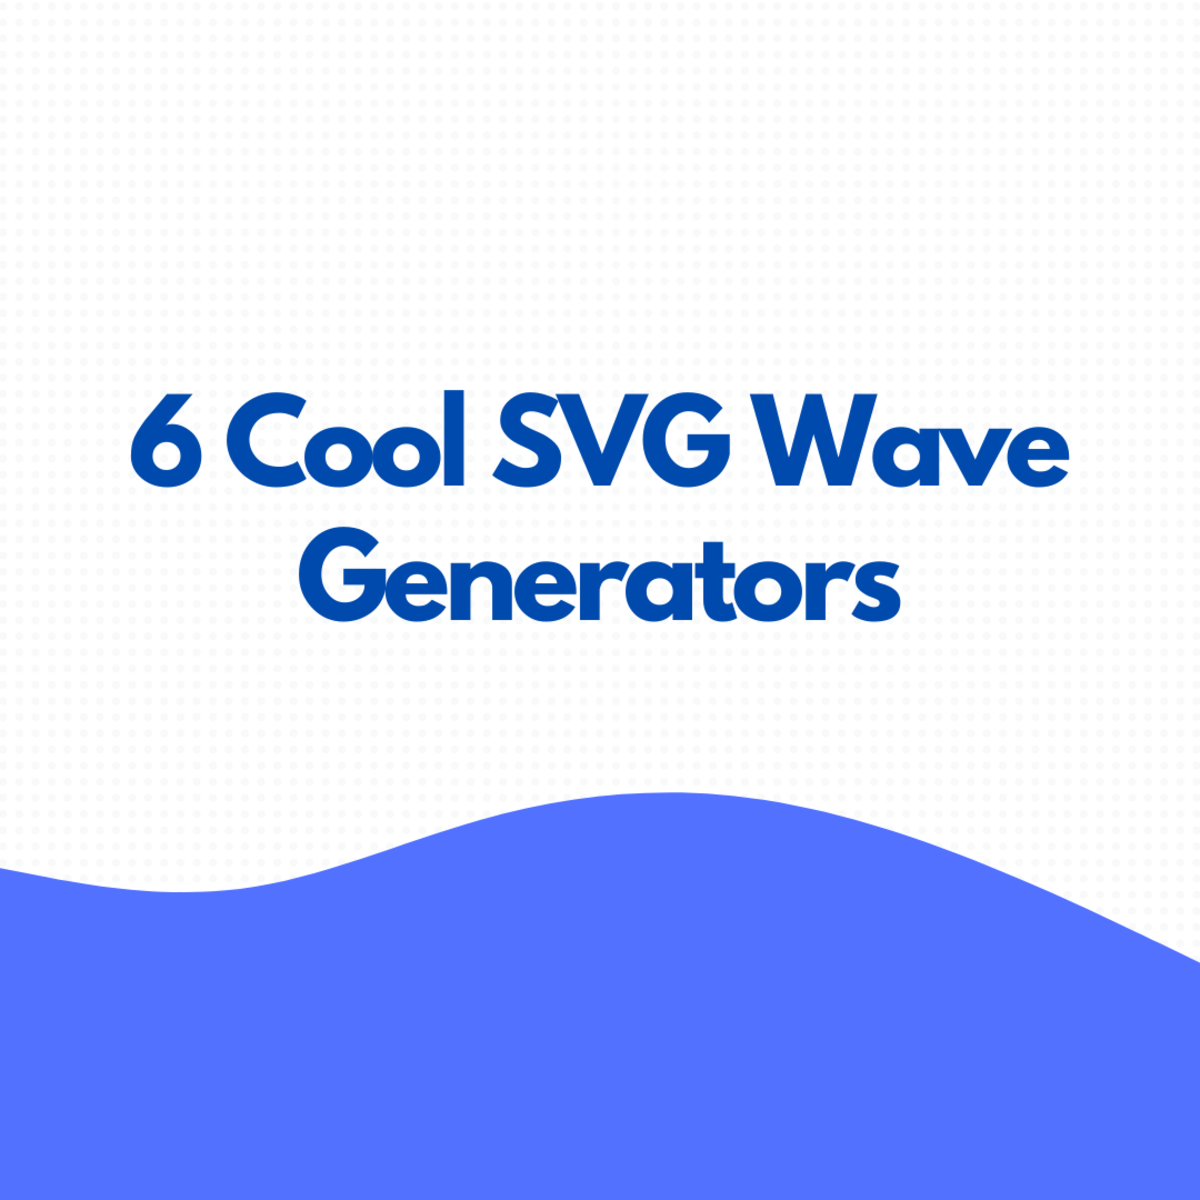 Discover some of the best SVG wave generators out there in this ultimate list!